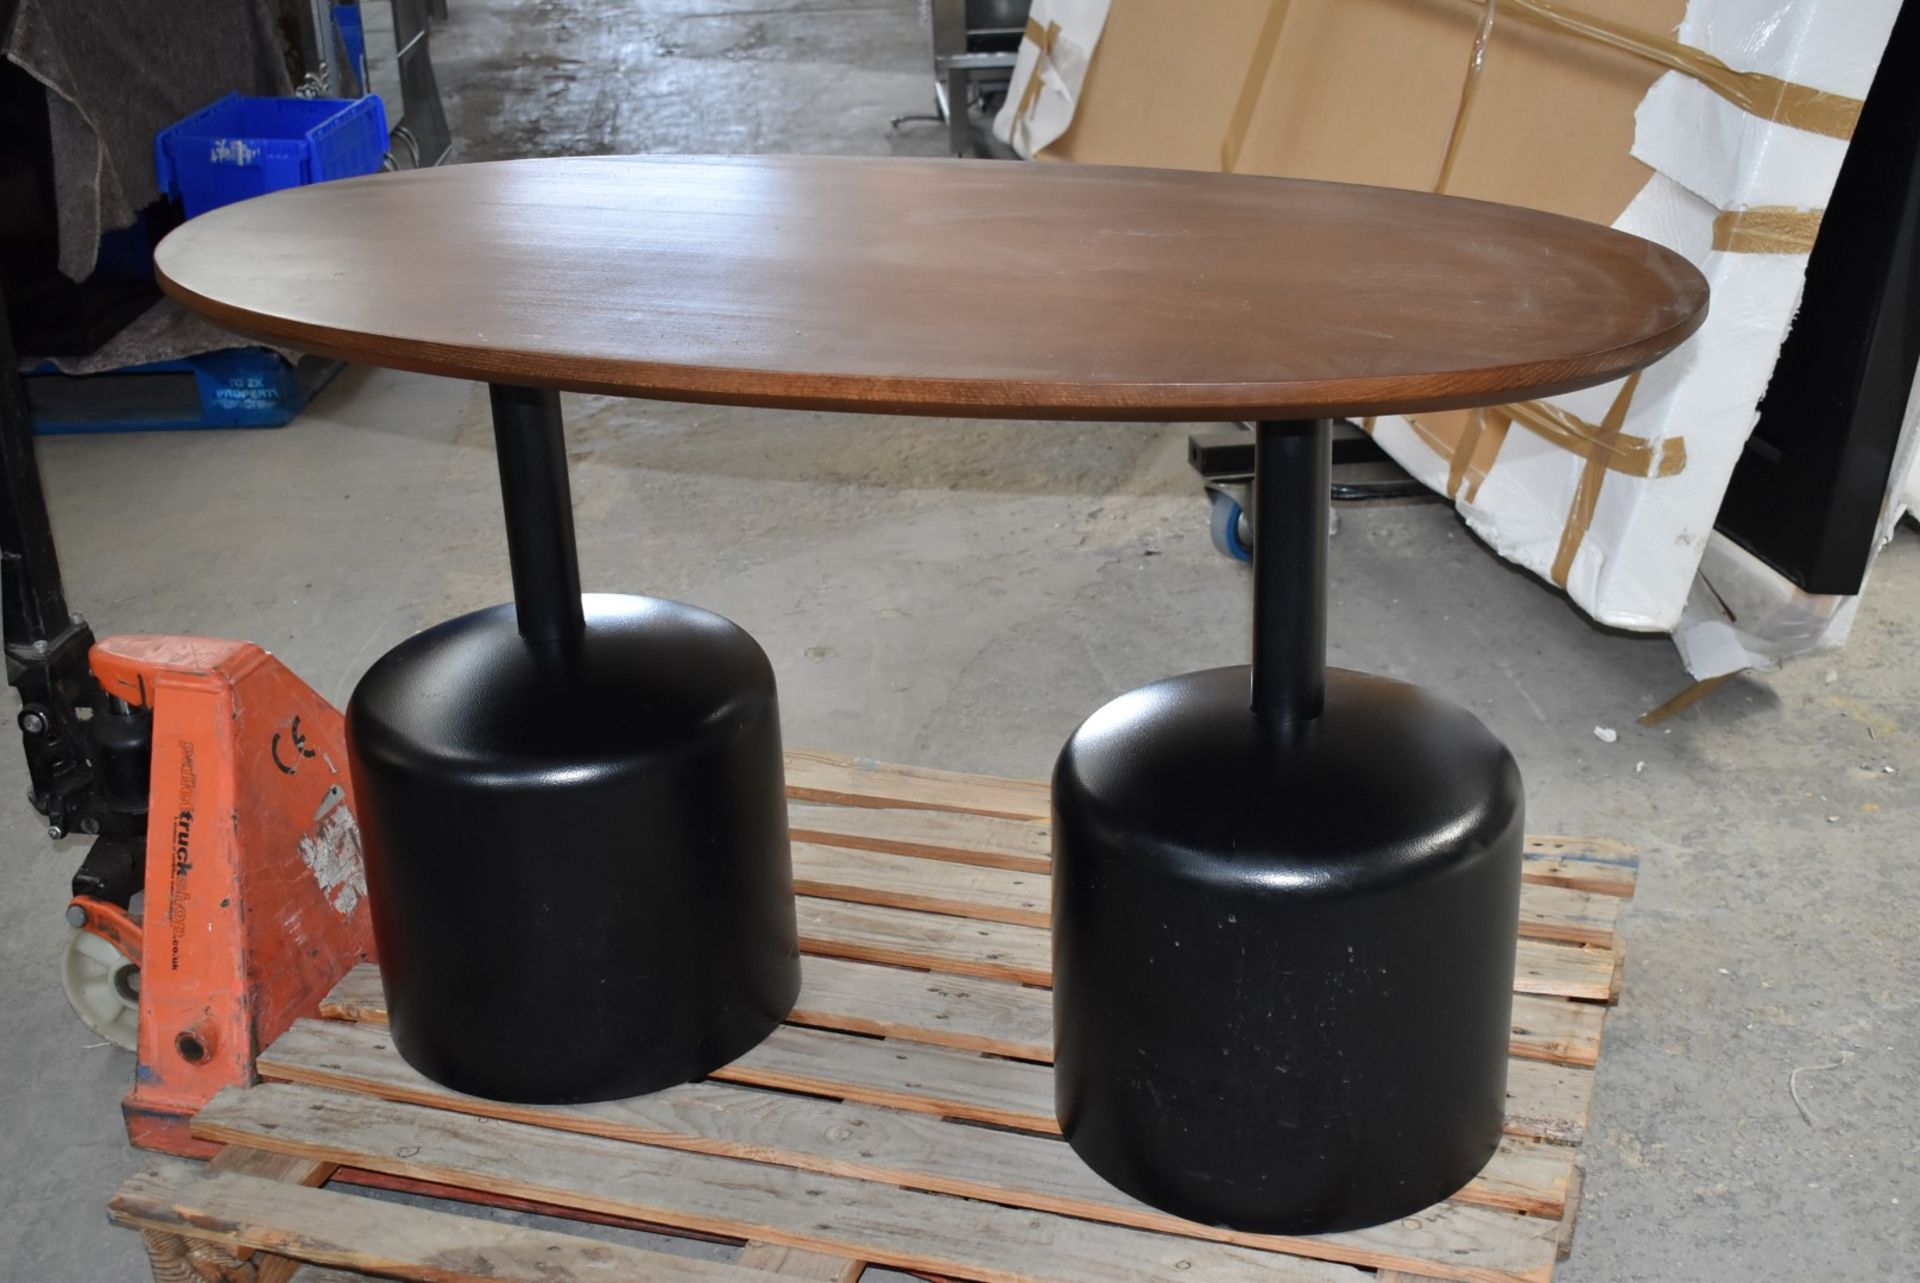 14 x Commercial Restaurant Tables Features Large Black Pedestals and Dark Stained Wooden Tops - Image 9 of 23